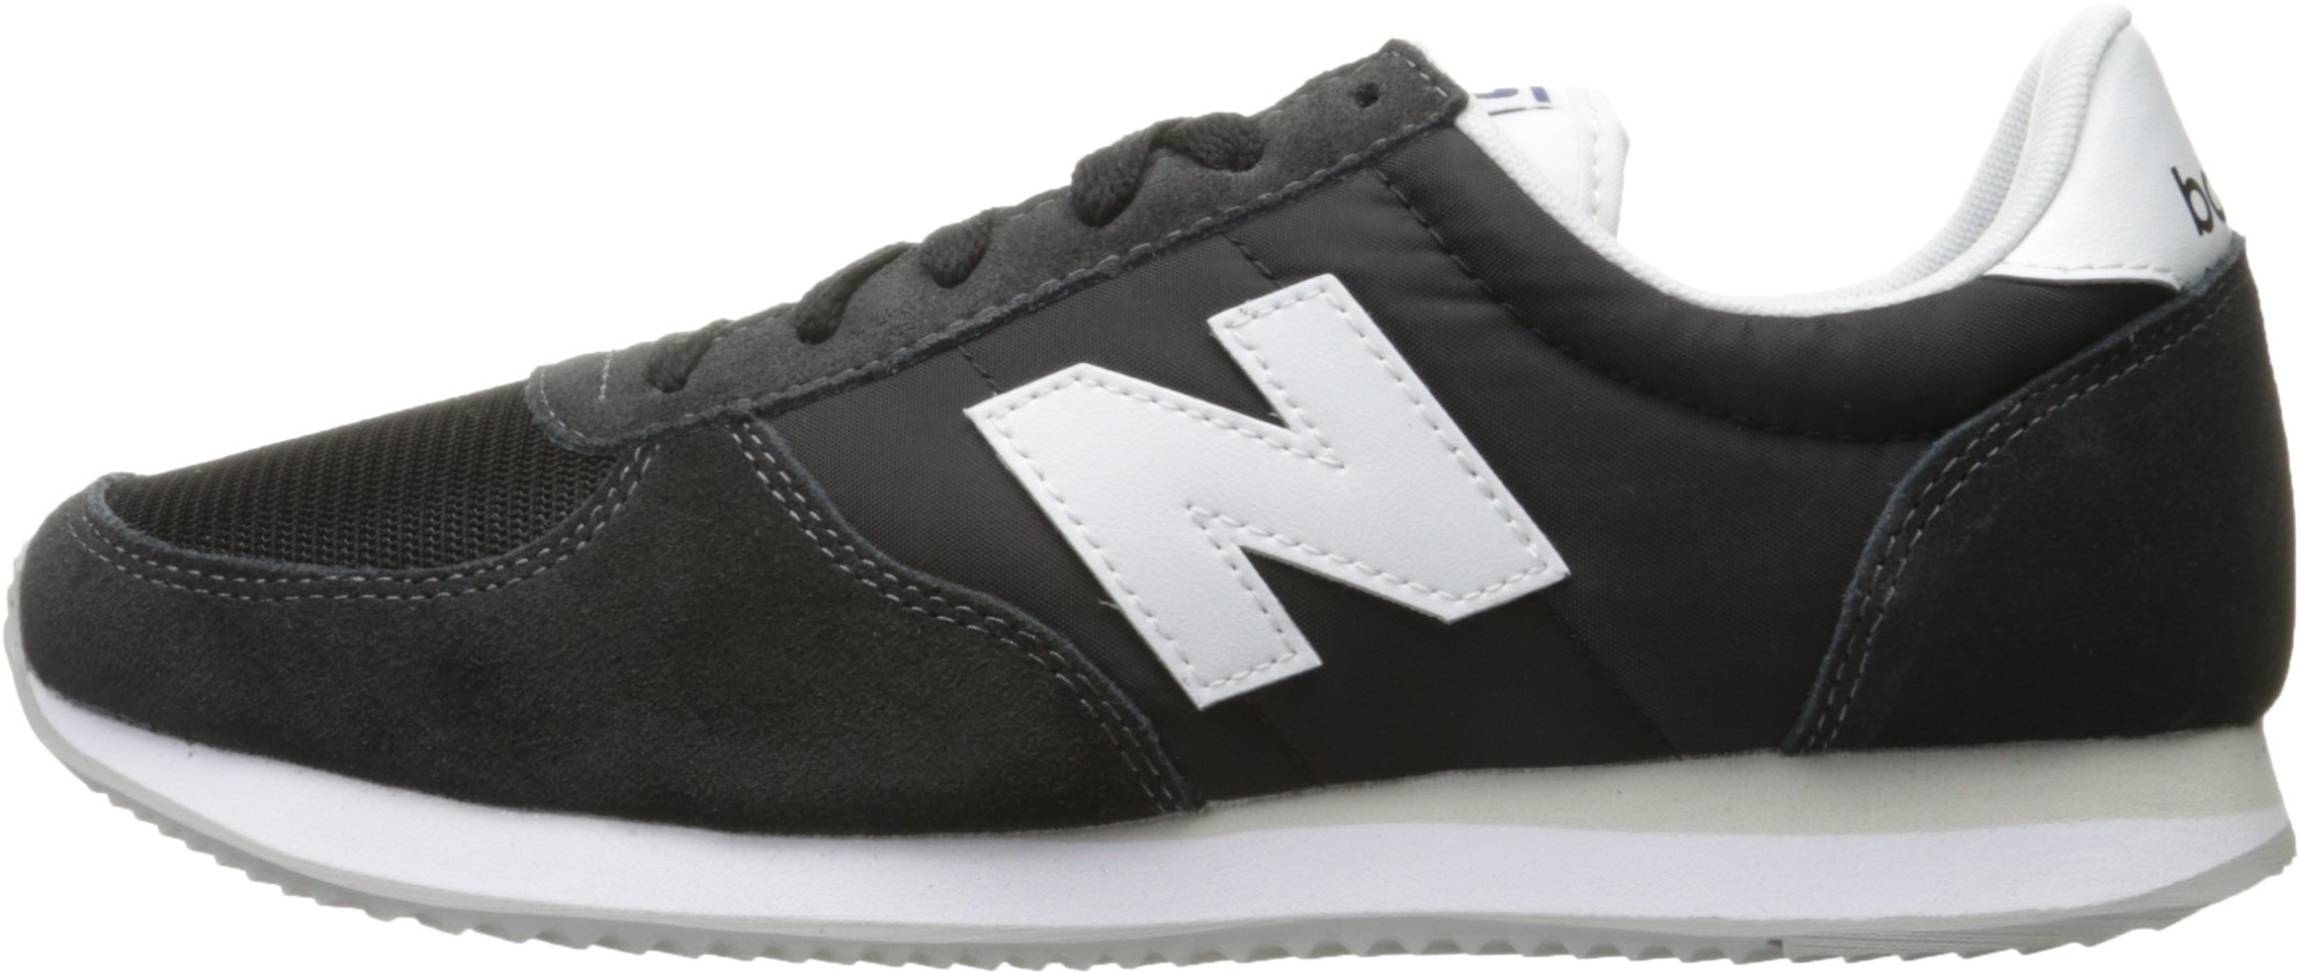 New Balance 220 sneakers in black (only £46) | RunRepeat